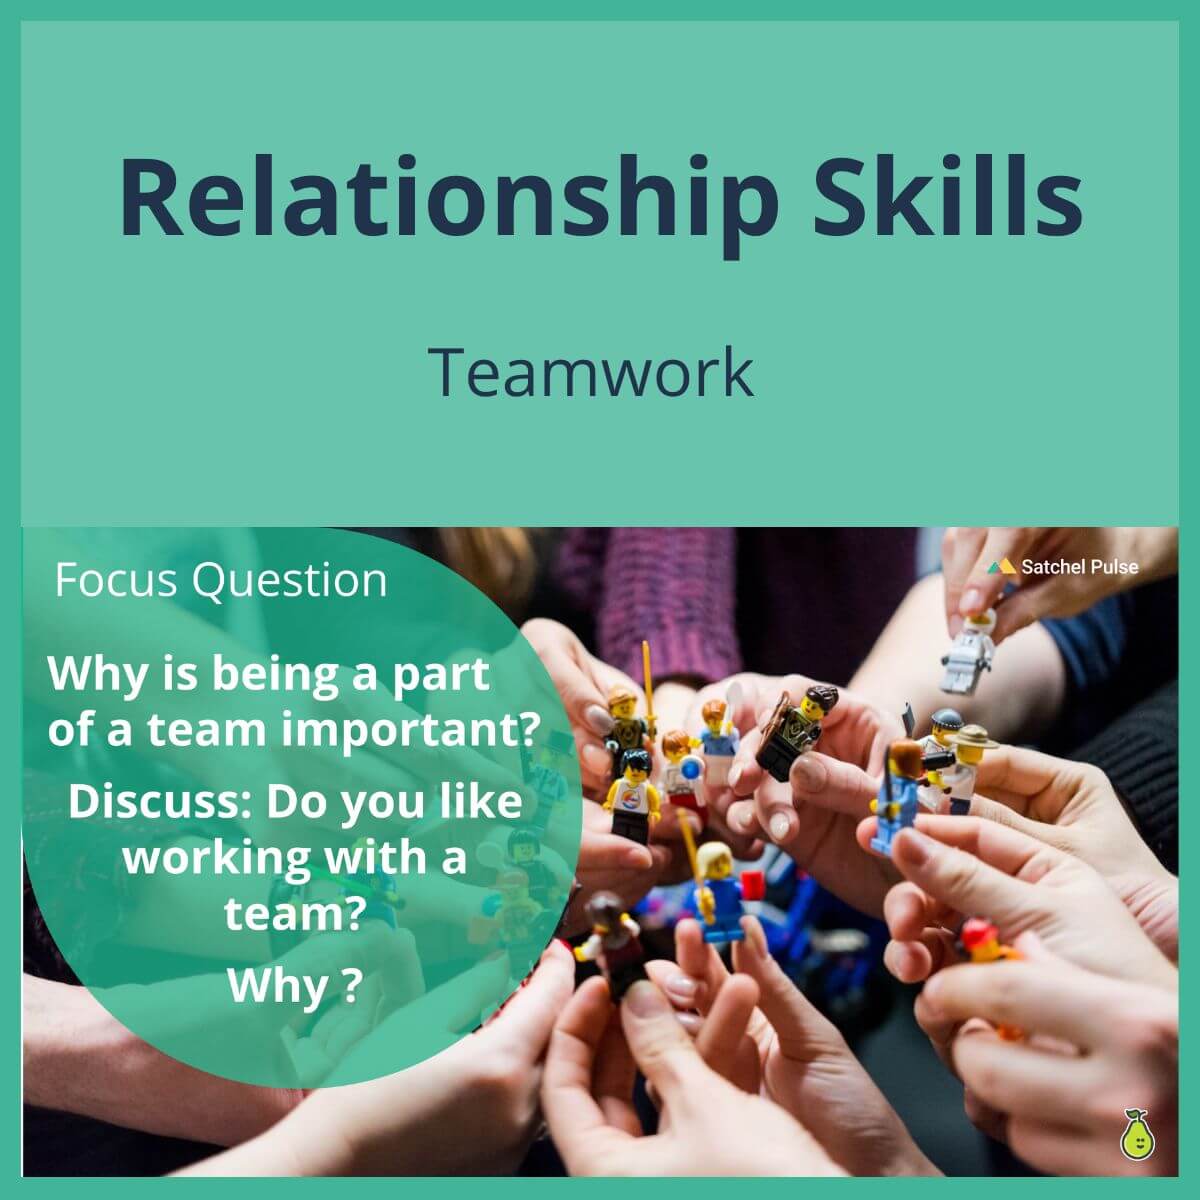 SEL Lesson focusing on Team Work to use in your classroom as one of your SEL activities for Relationship Skills